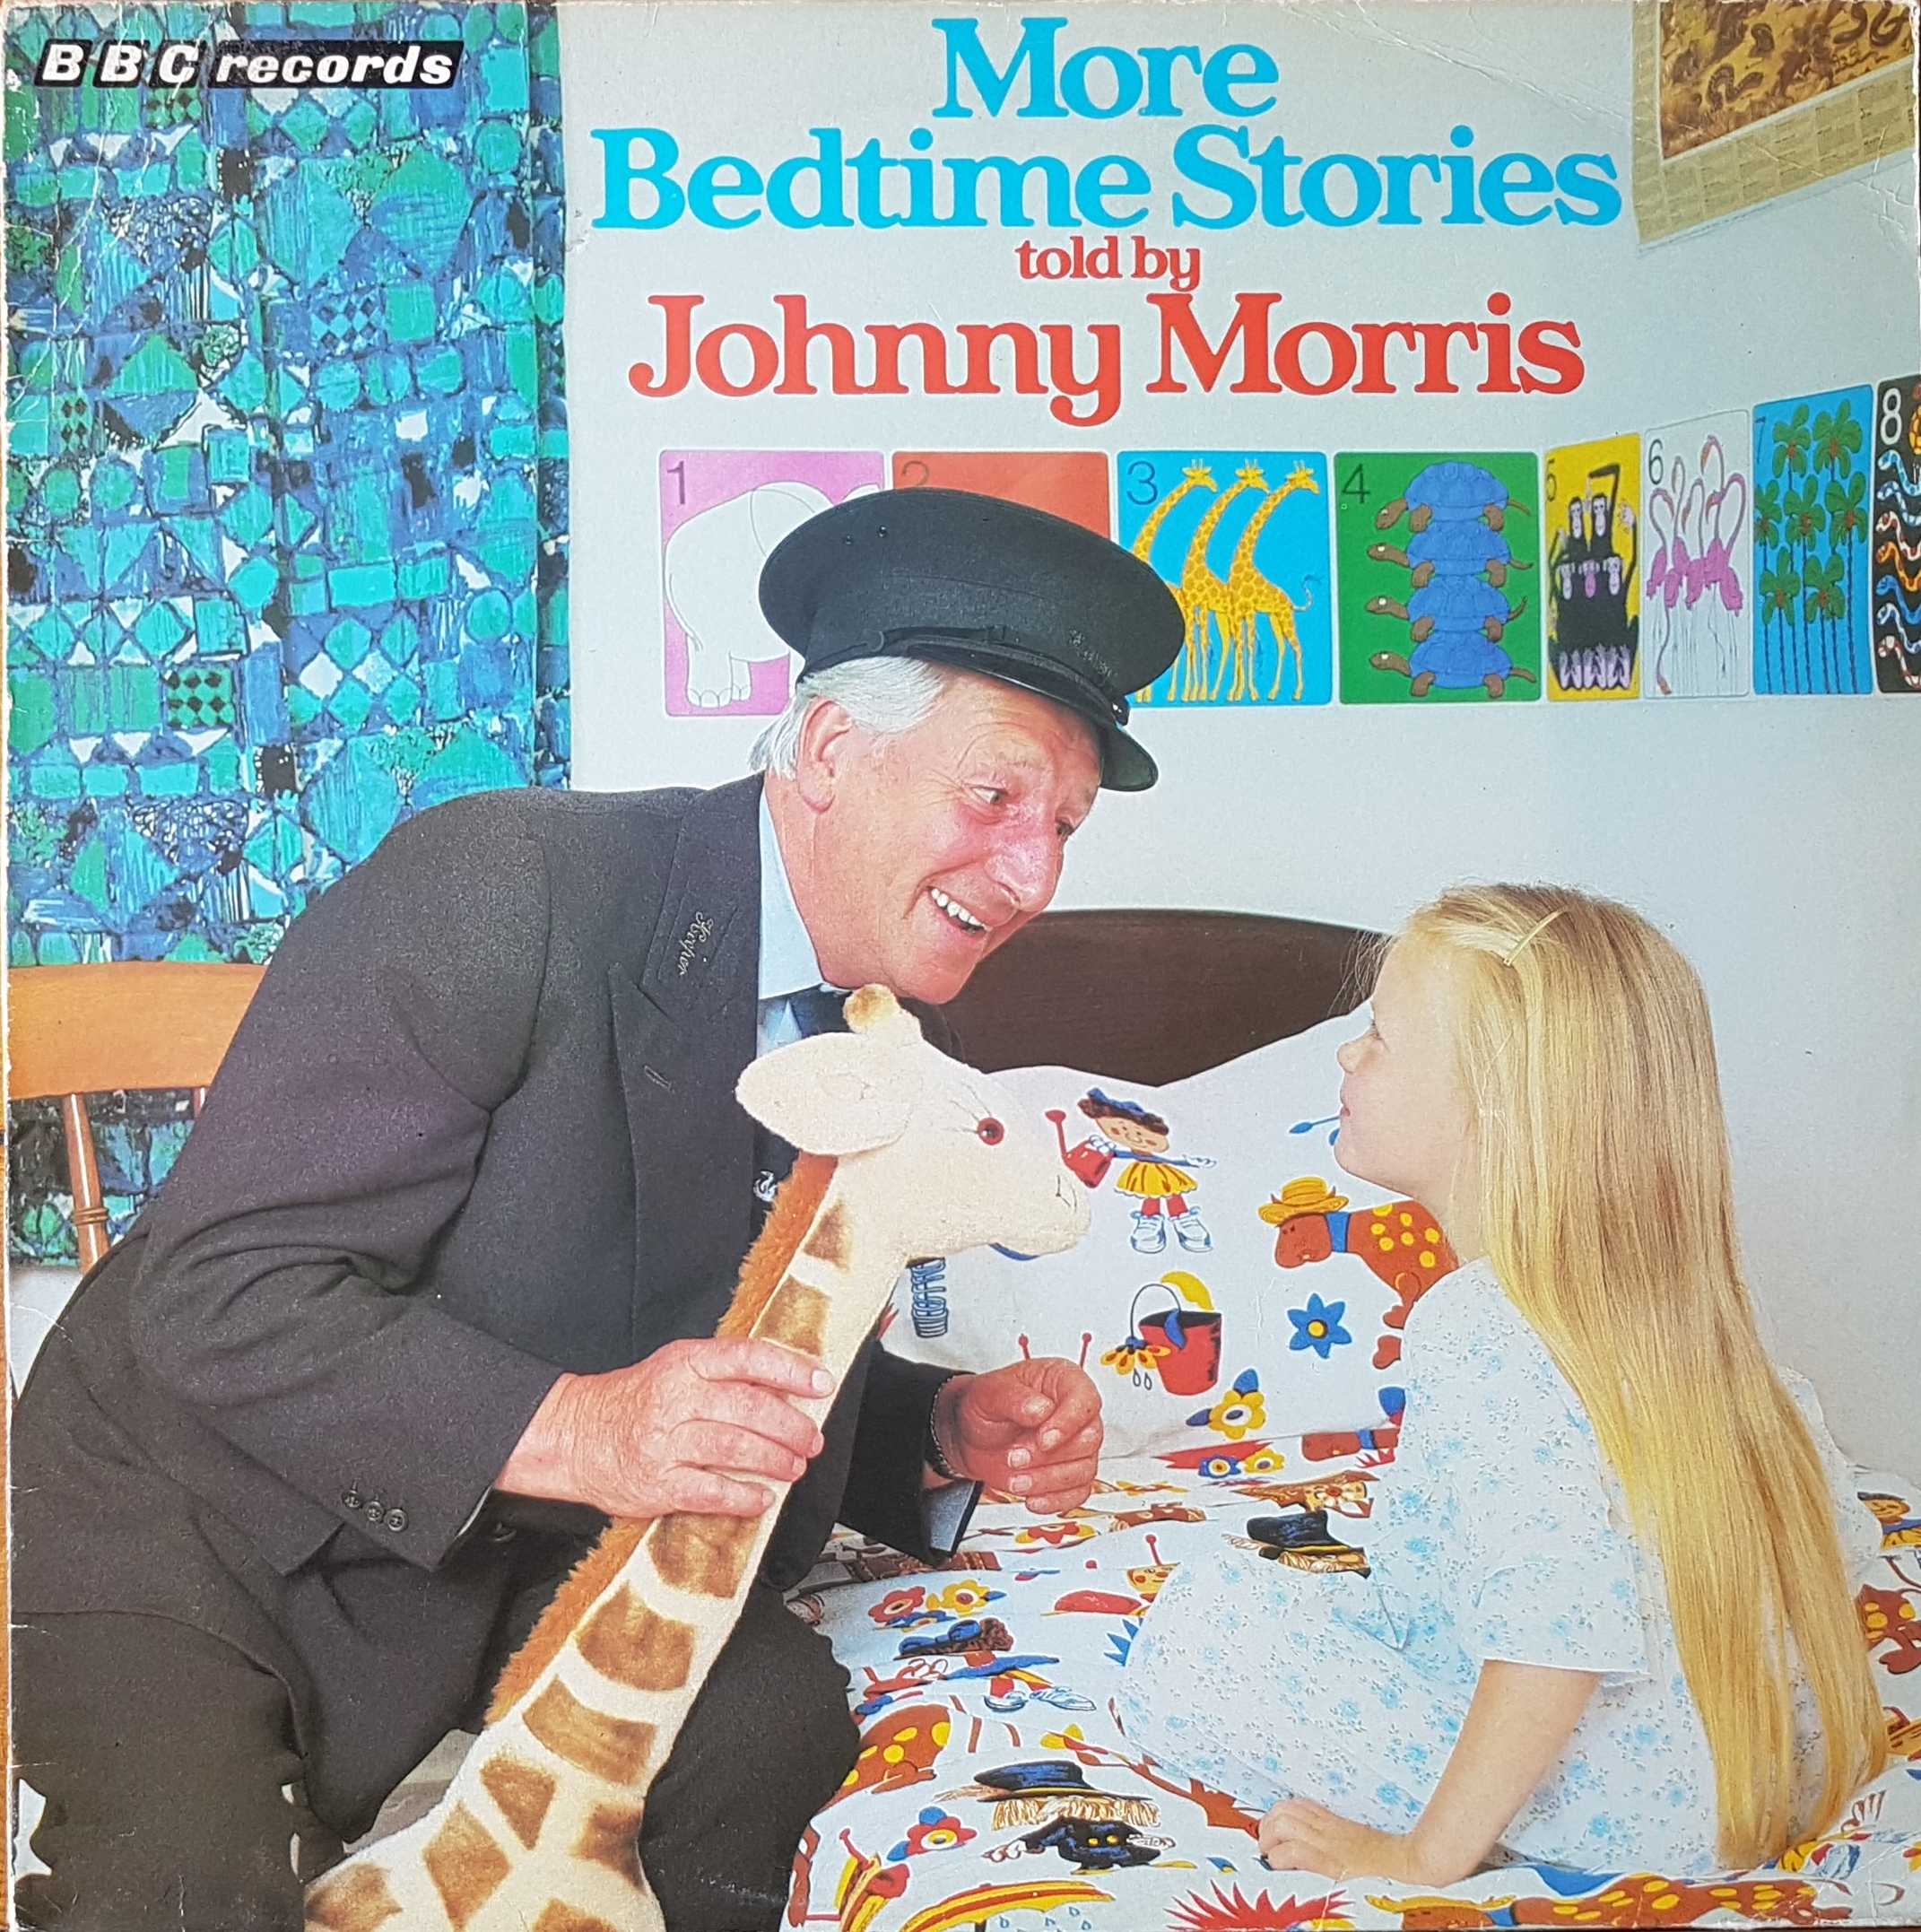 Picture of REC 333 More bedtime stories by artist Johnny Morris from the BBC albums - Records and Tapes library